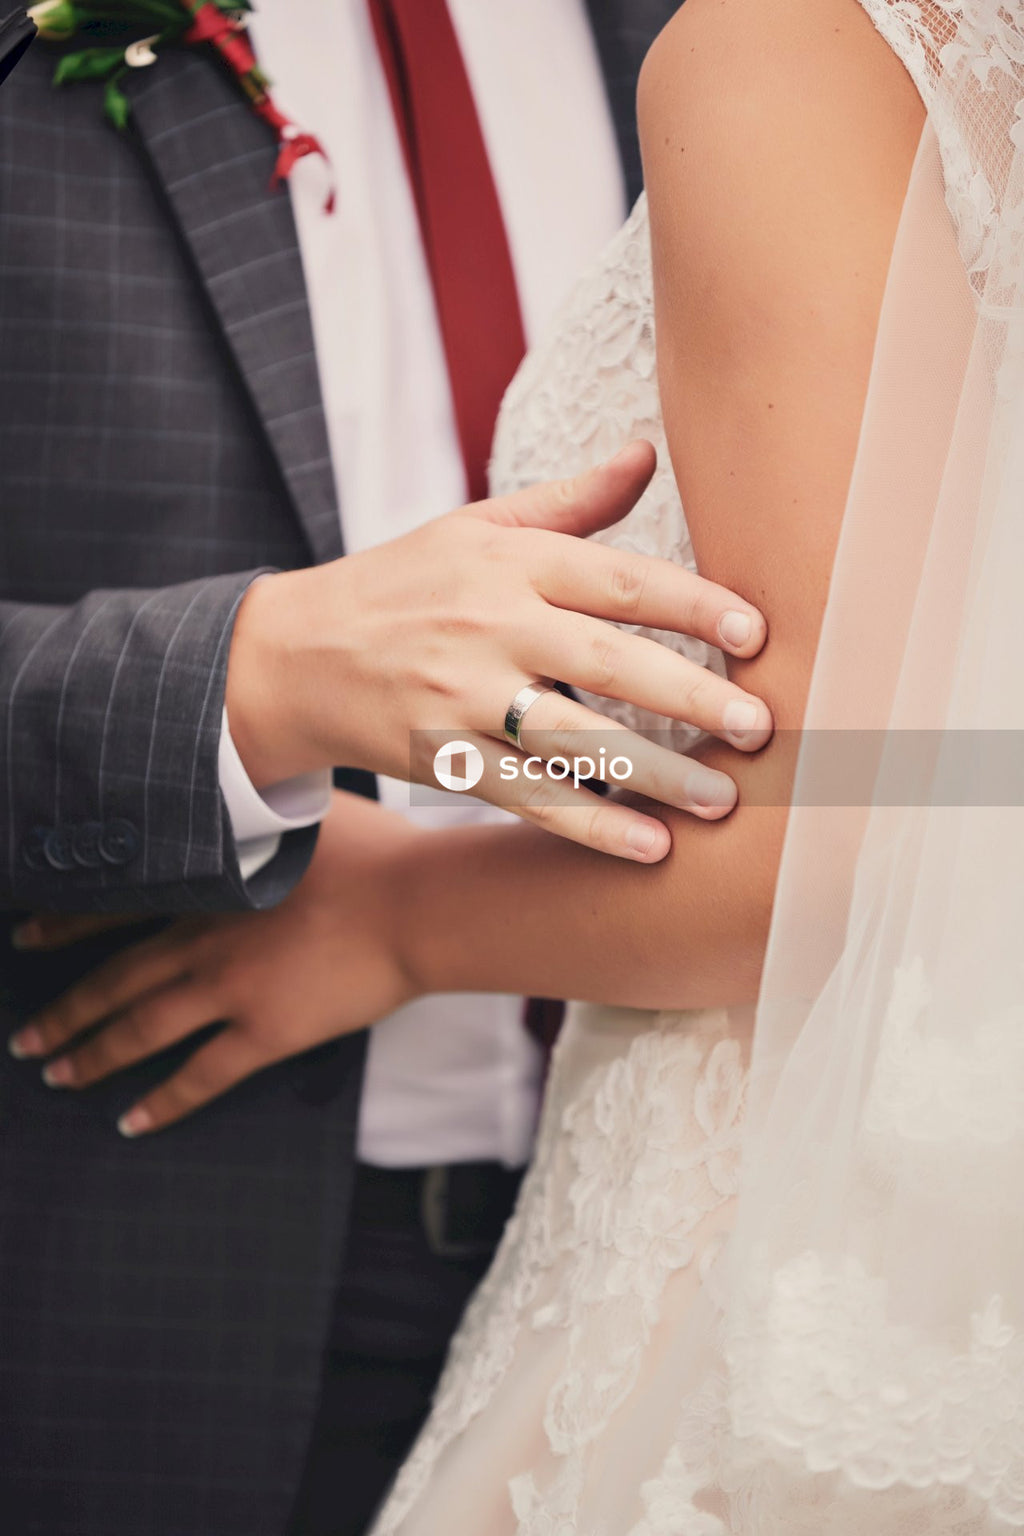 Man in black suit jacket and woman in white wedding dress